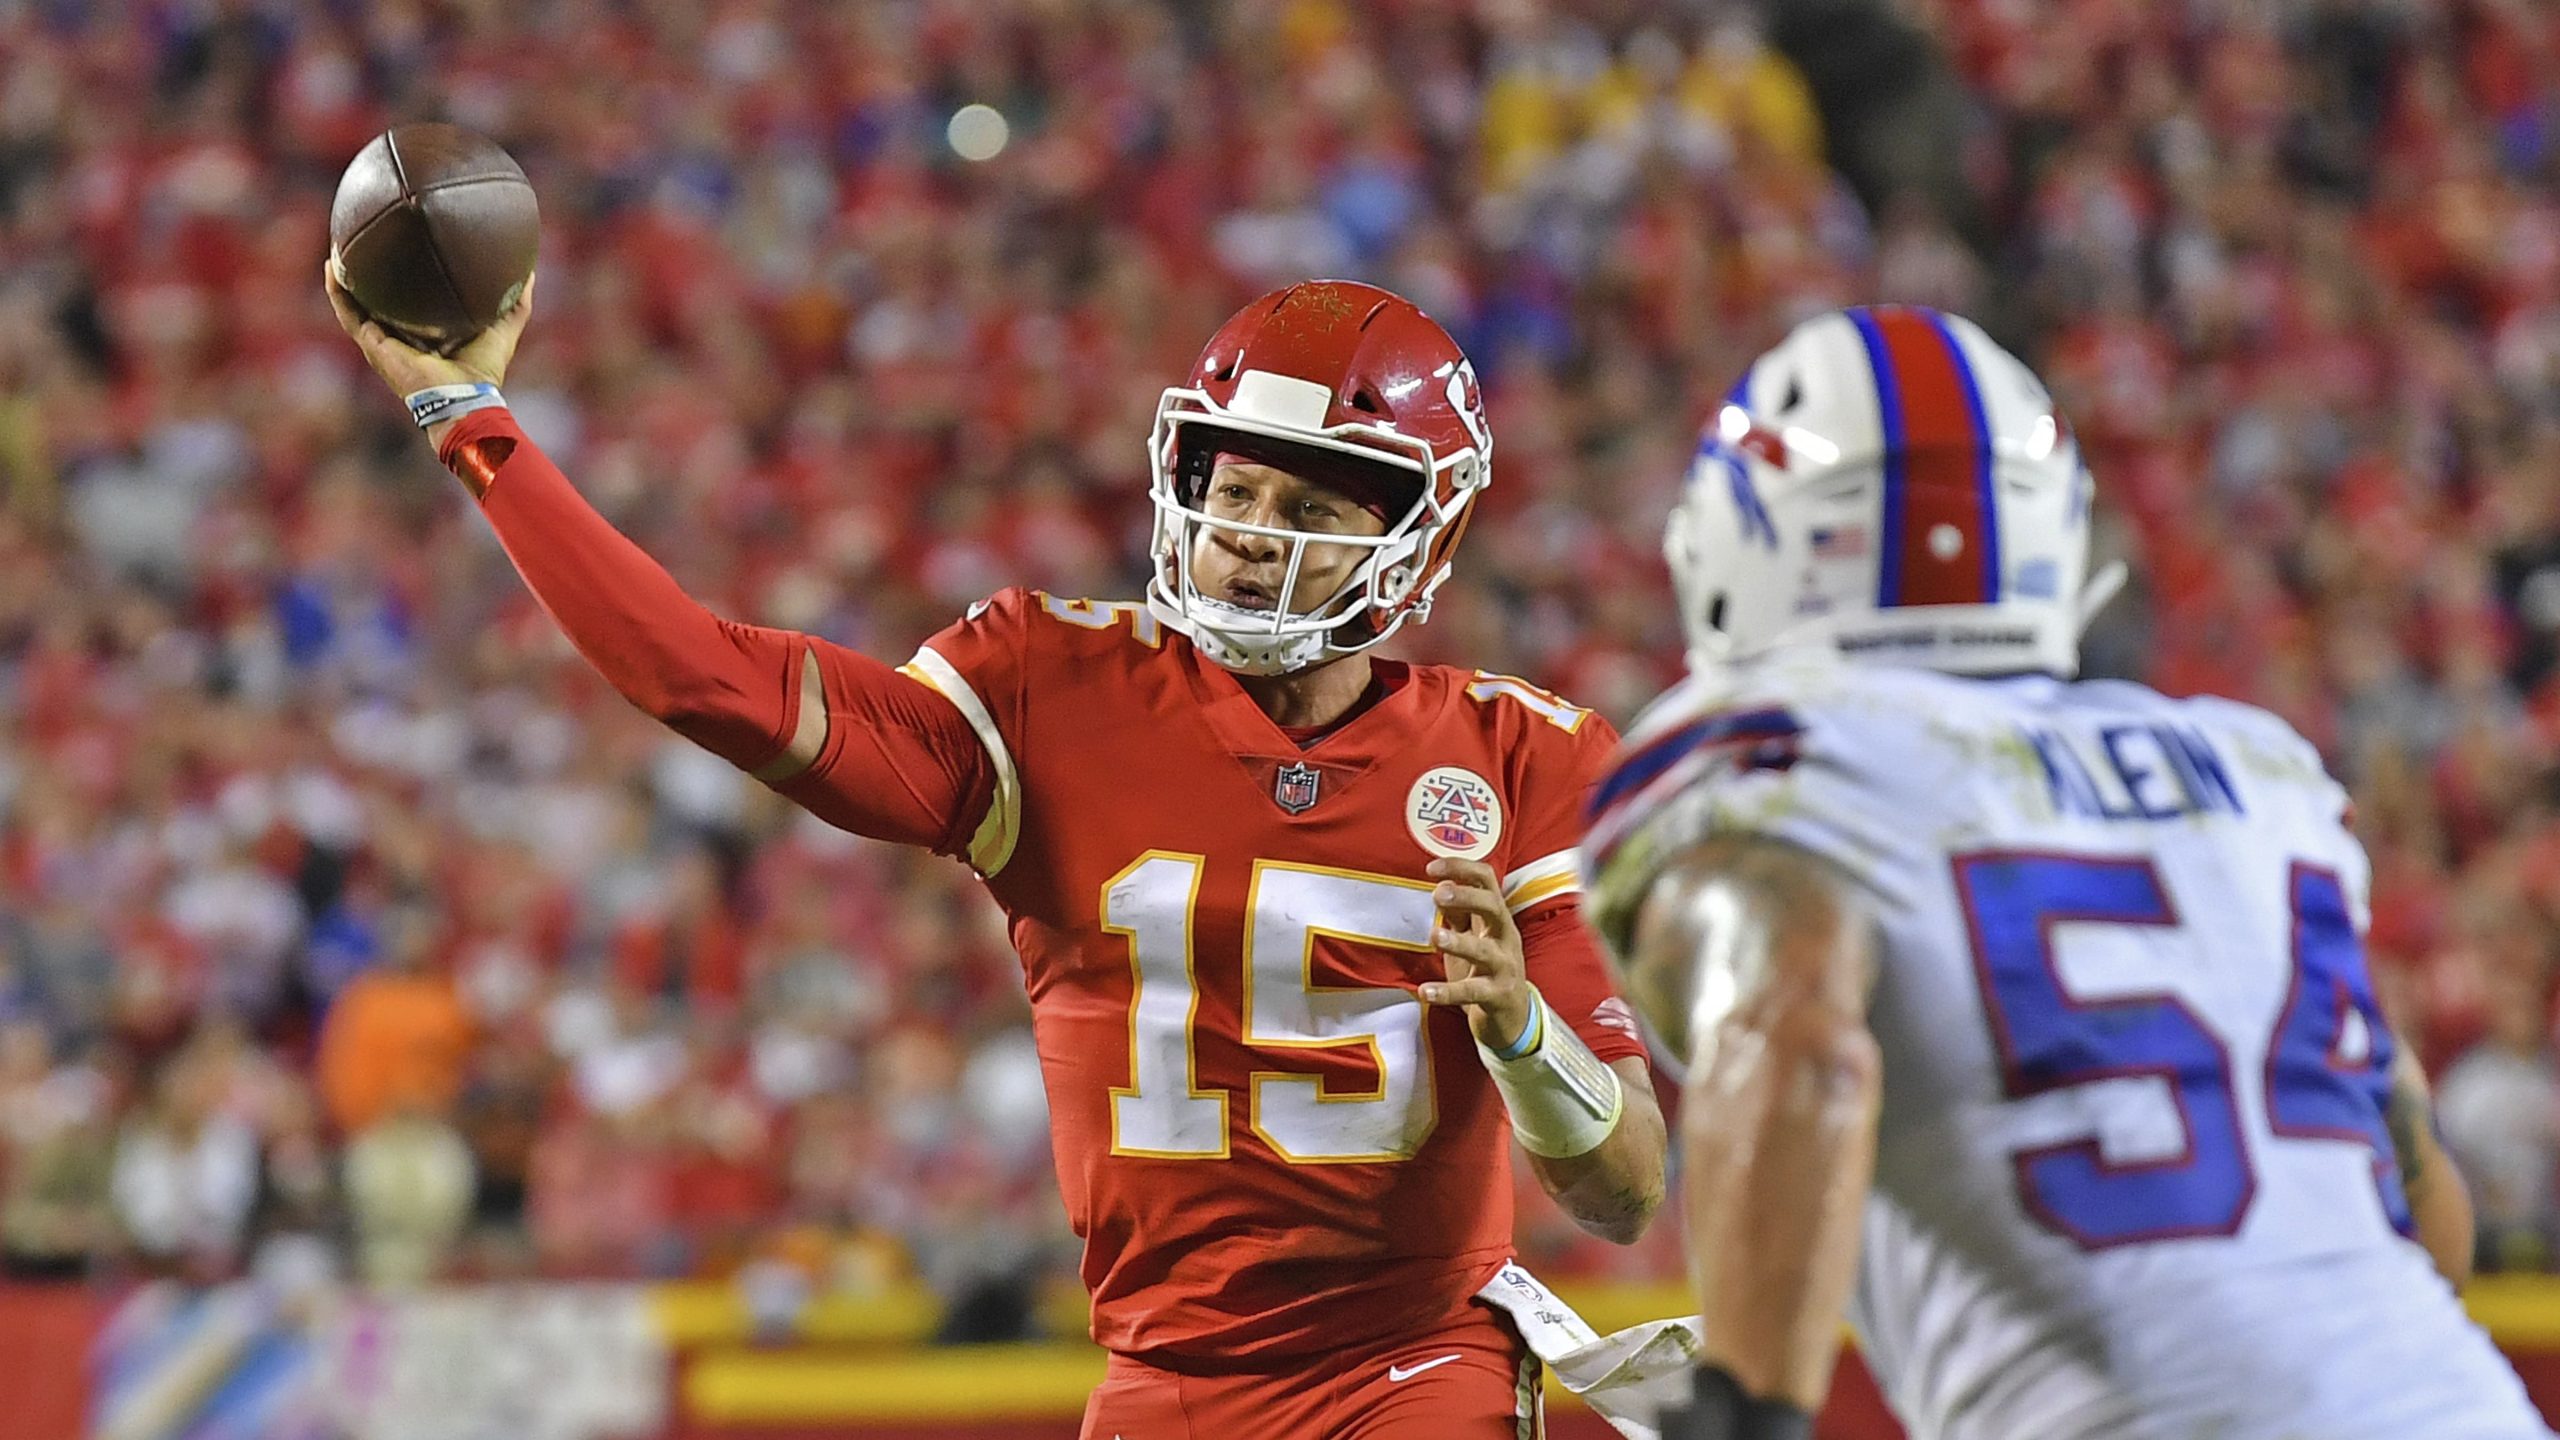 NFL Playoff Divisional Round: Preview, Predictions & Sports Betting Advice, by Gage Hutzley